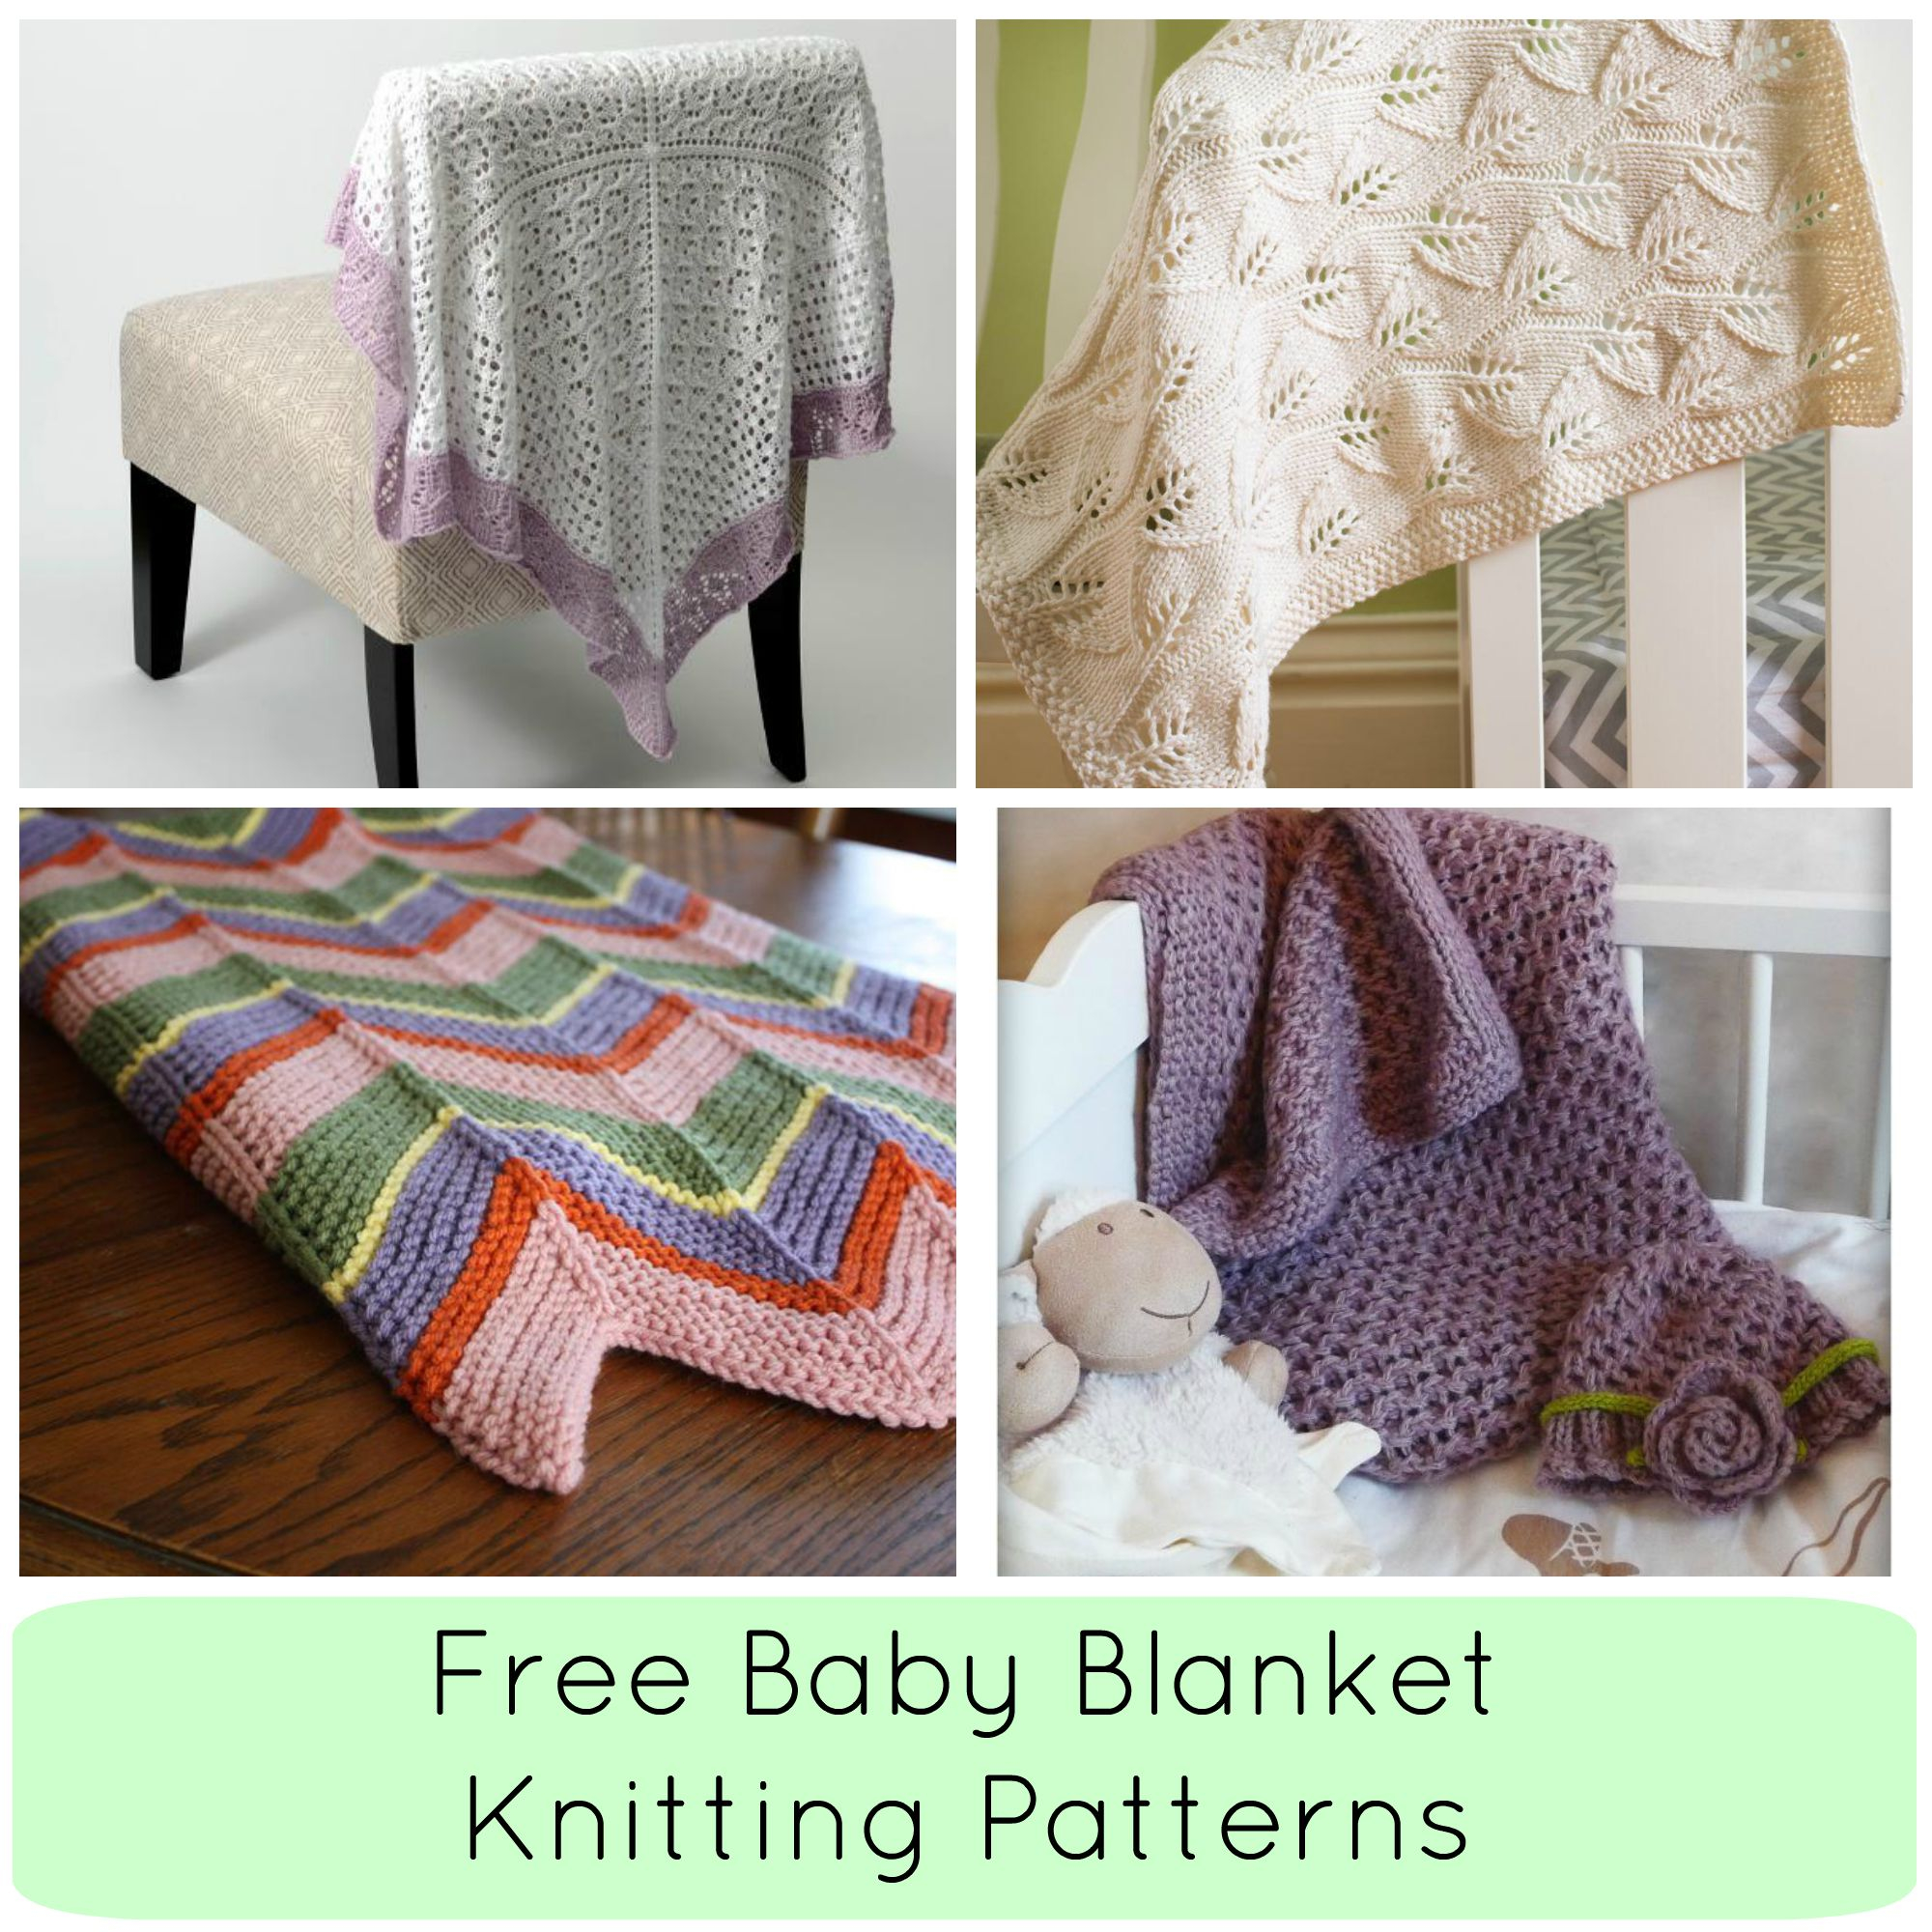 Free Easy Knitting Patterns For Baby Blankets 8 Free Ba Blanket Knitting Patterns Craftsy